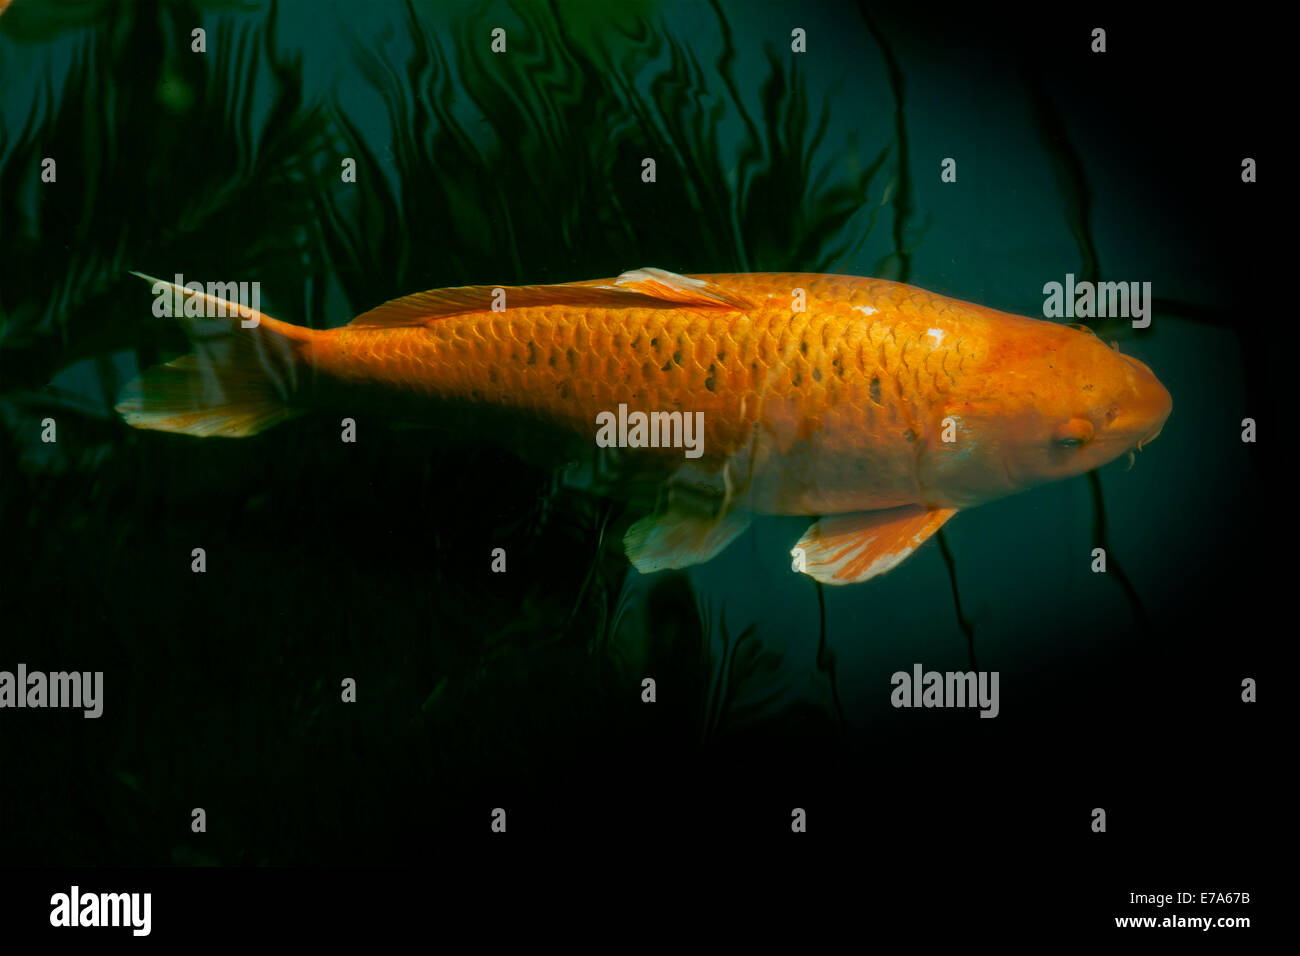 Ornamental red fish in a dark green pond with reflections Stock Photo